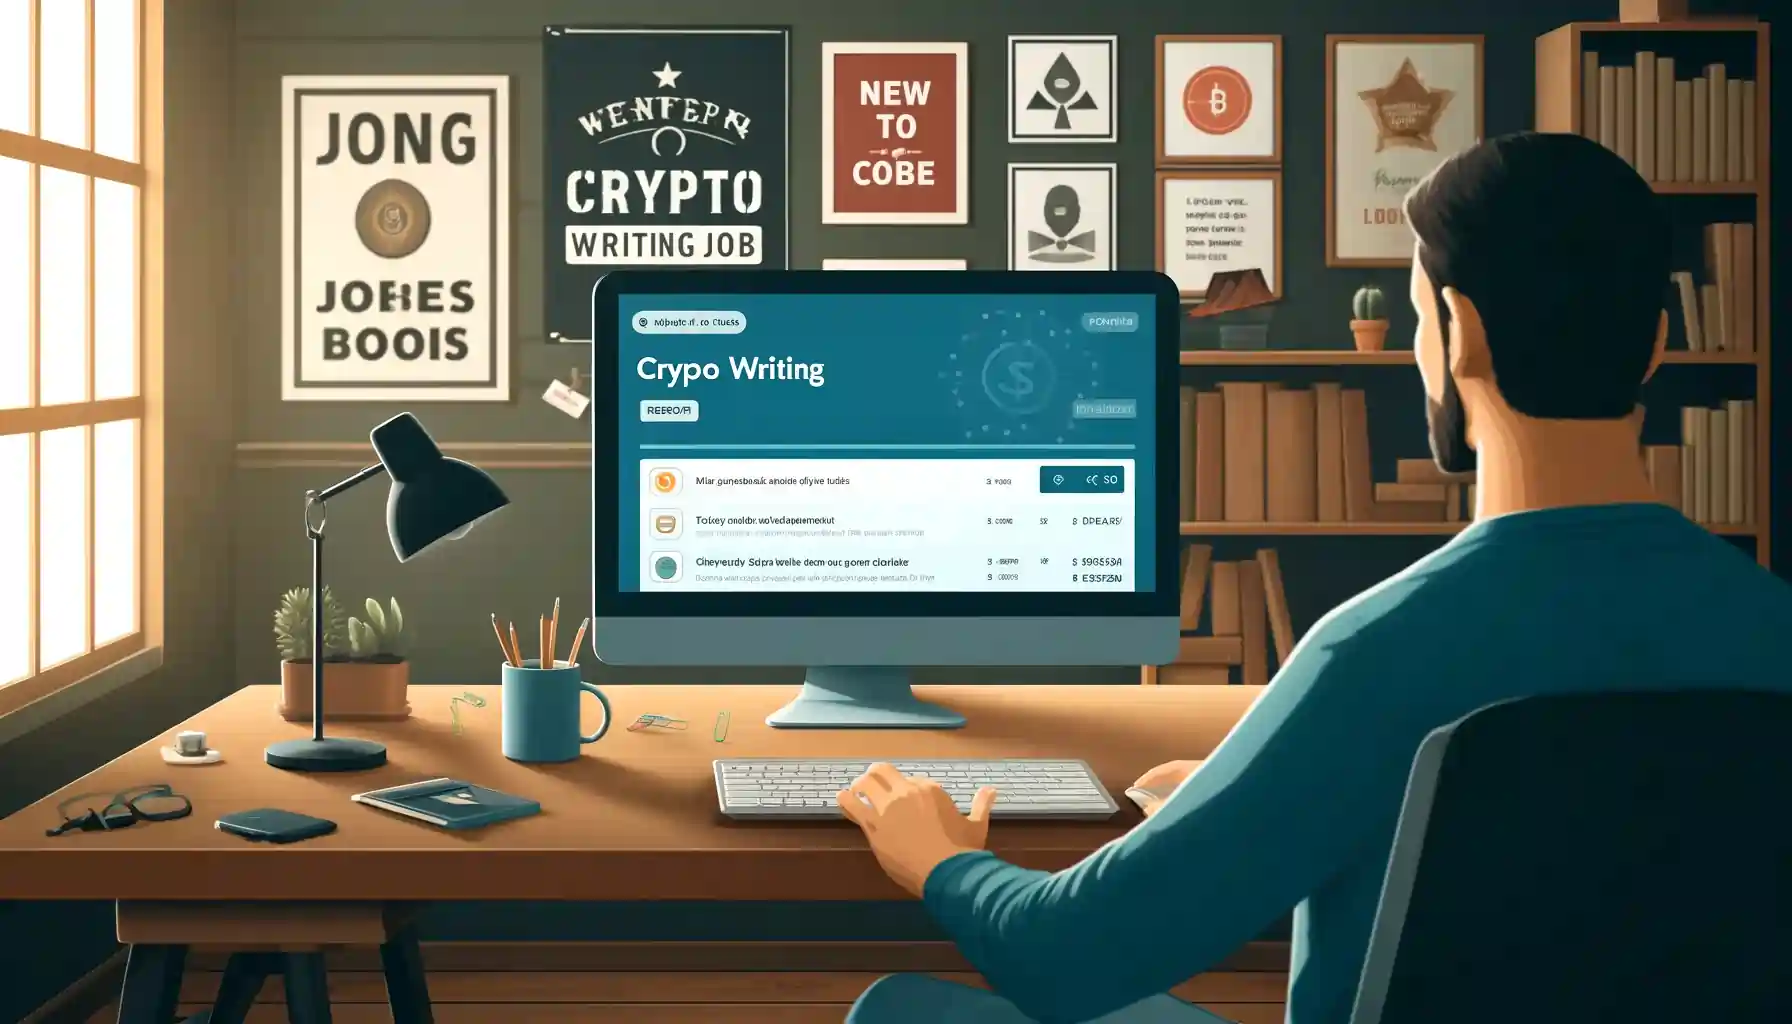 Where to find crypto writing jobs